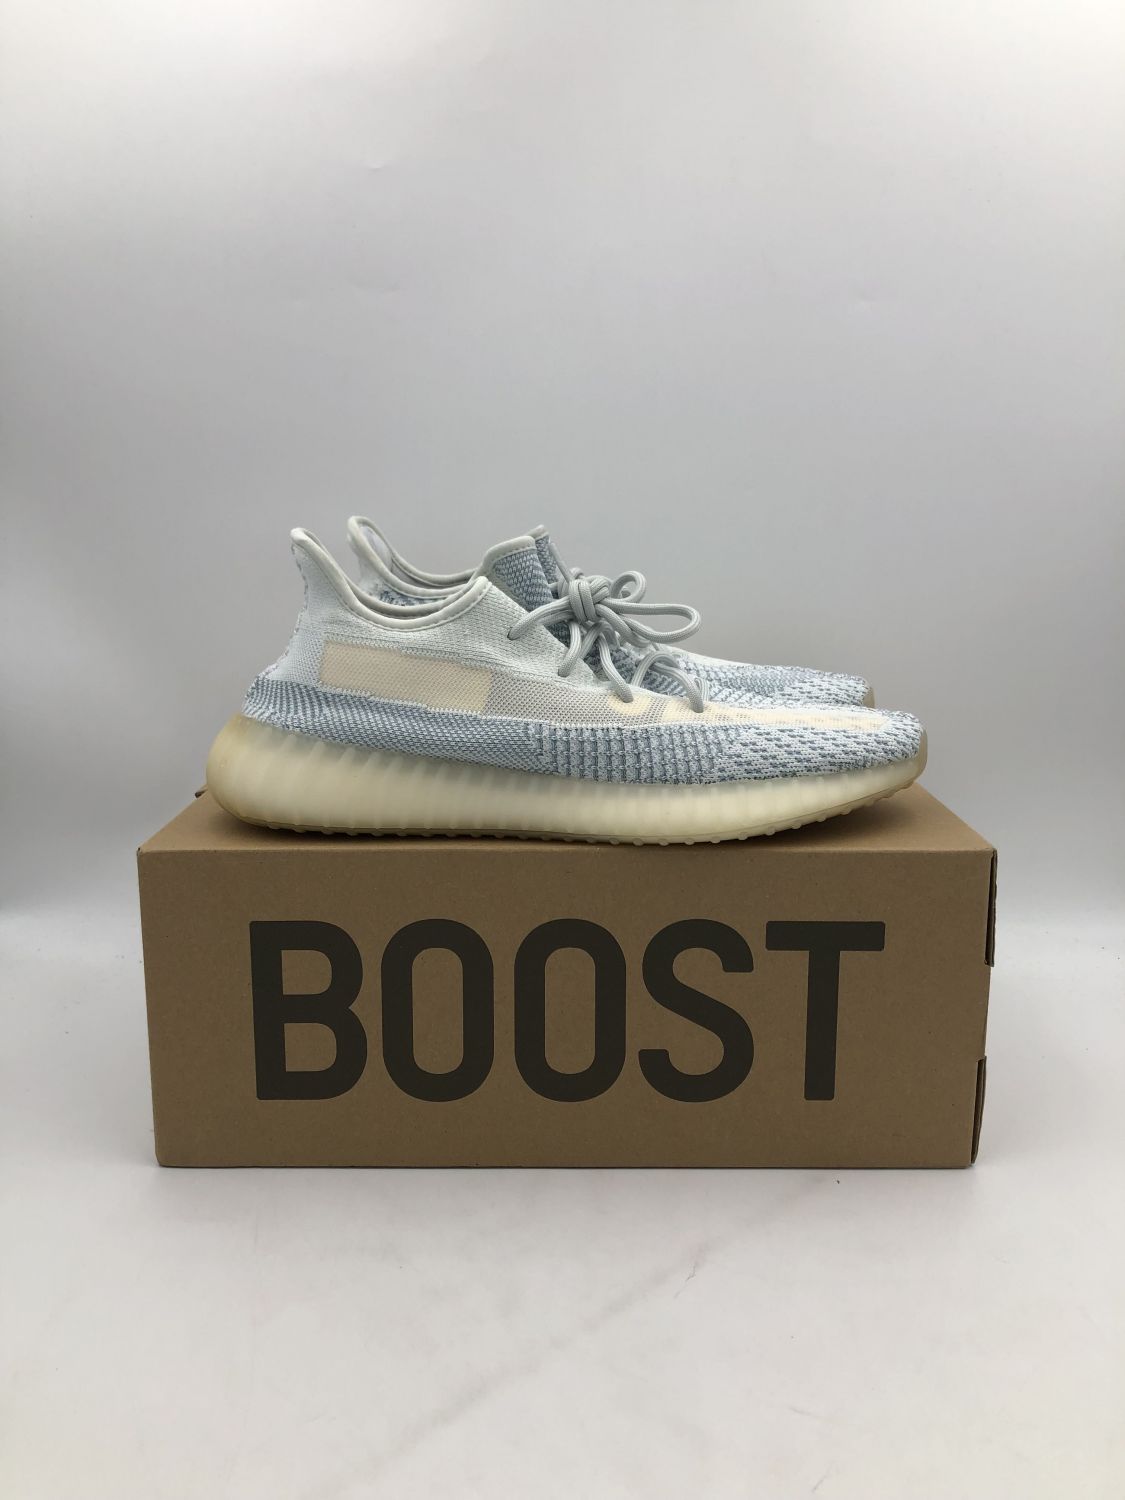 Replica Adidas Yeezy Boost 350 V2 Cloud White (Non - supreme yeezy v2  philippine price list for cars - Reflective) FW3043 [Budget Version] -  ShinShops